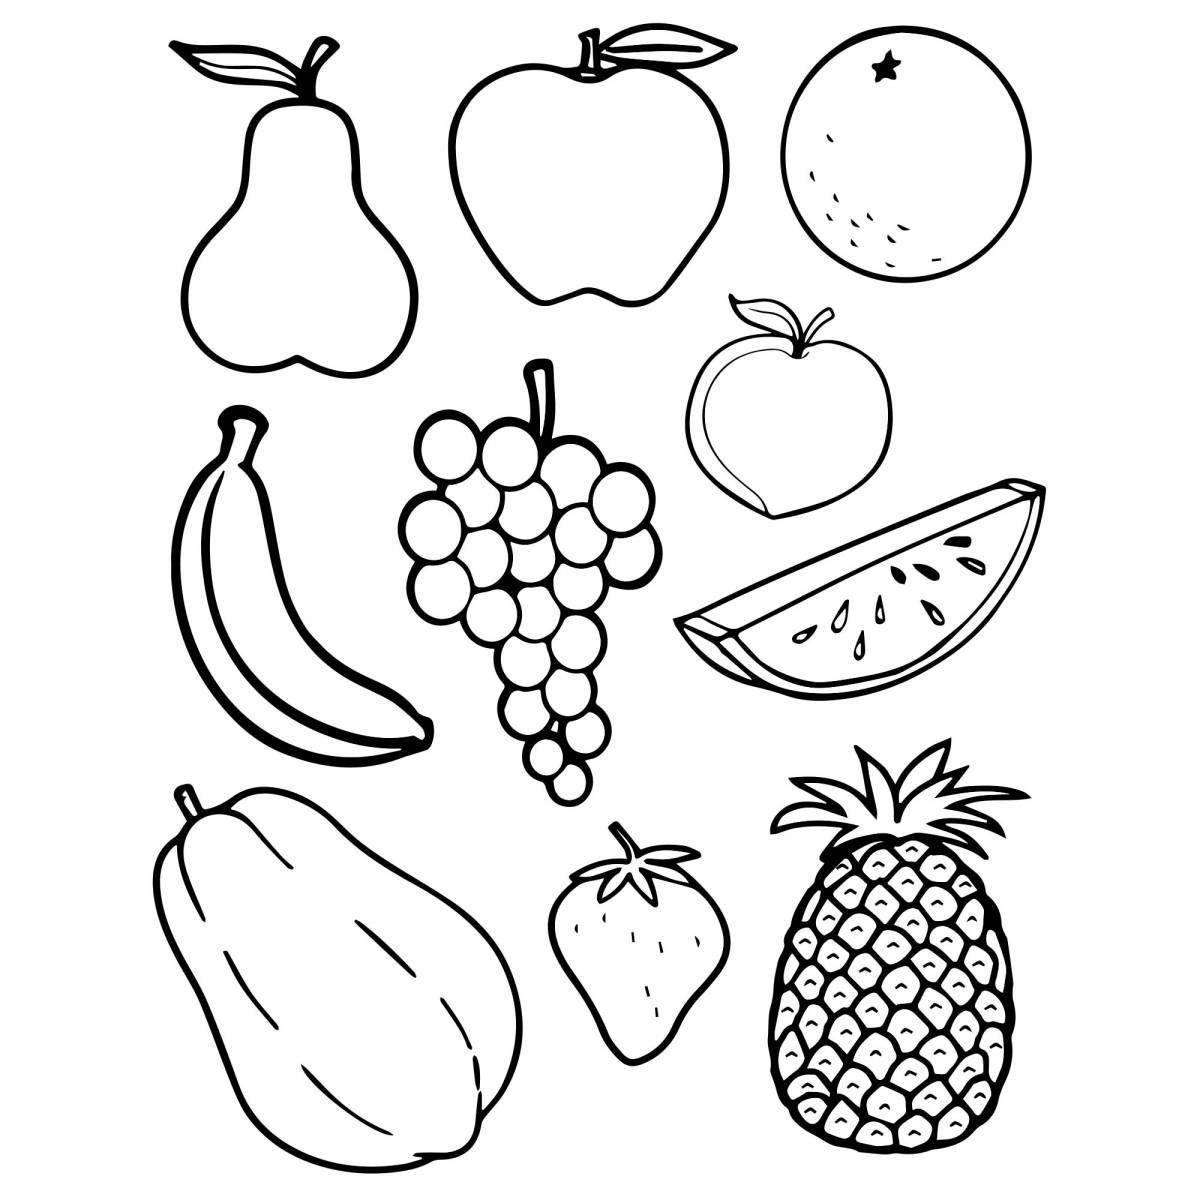 Adorable fruit coloring book for 4-5 year olds